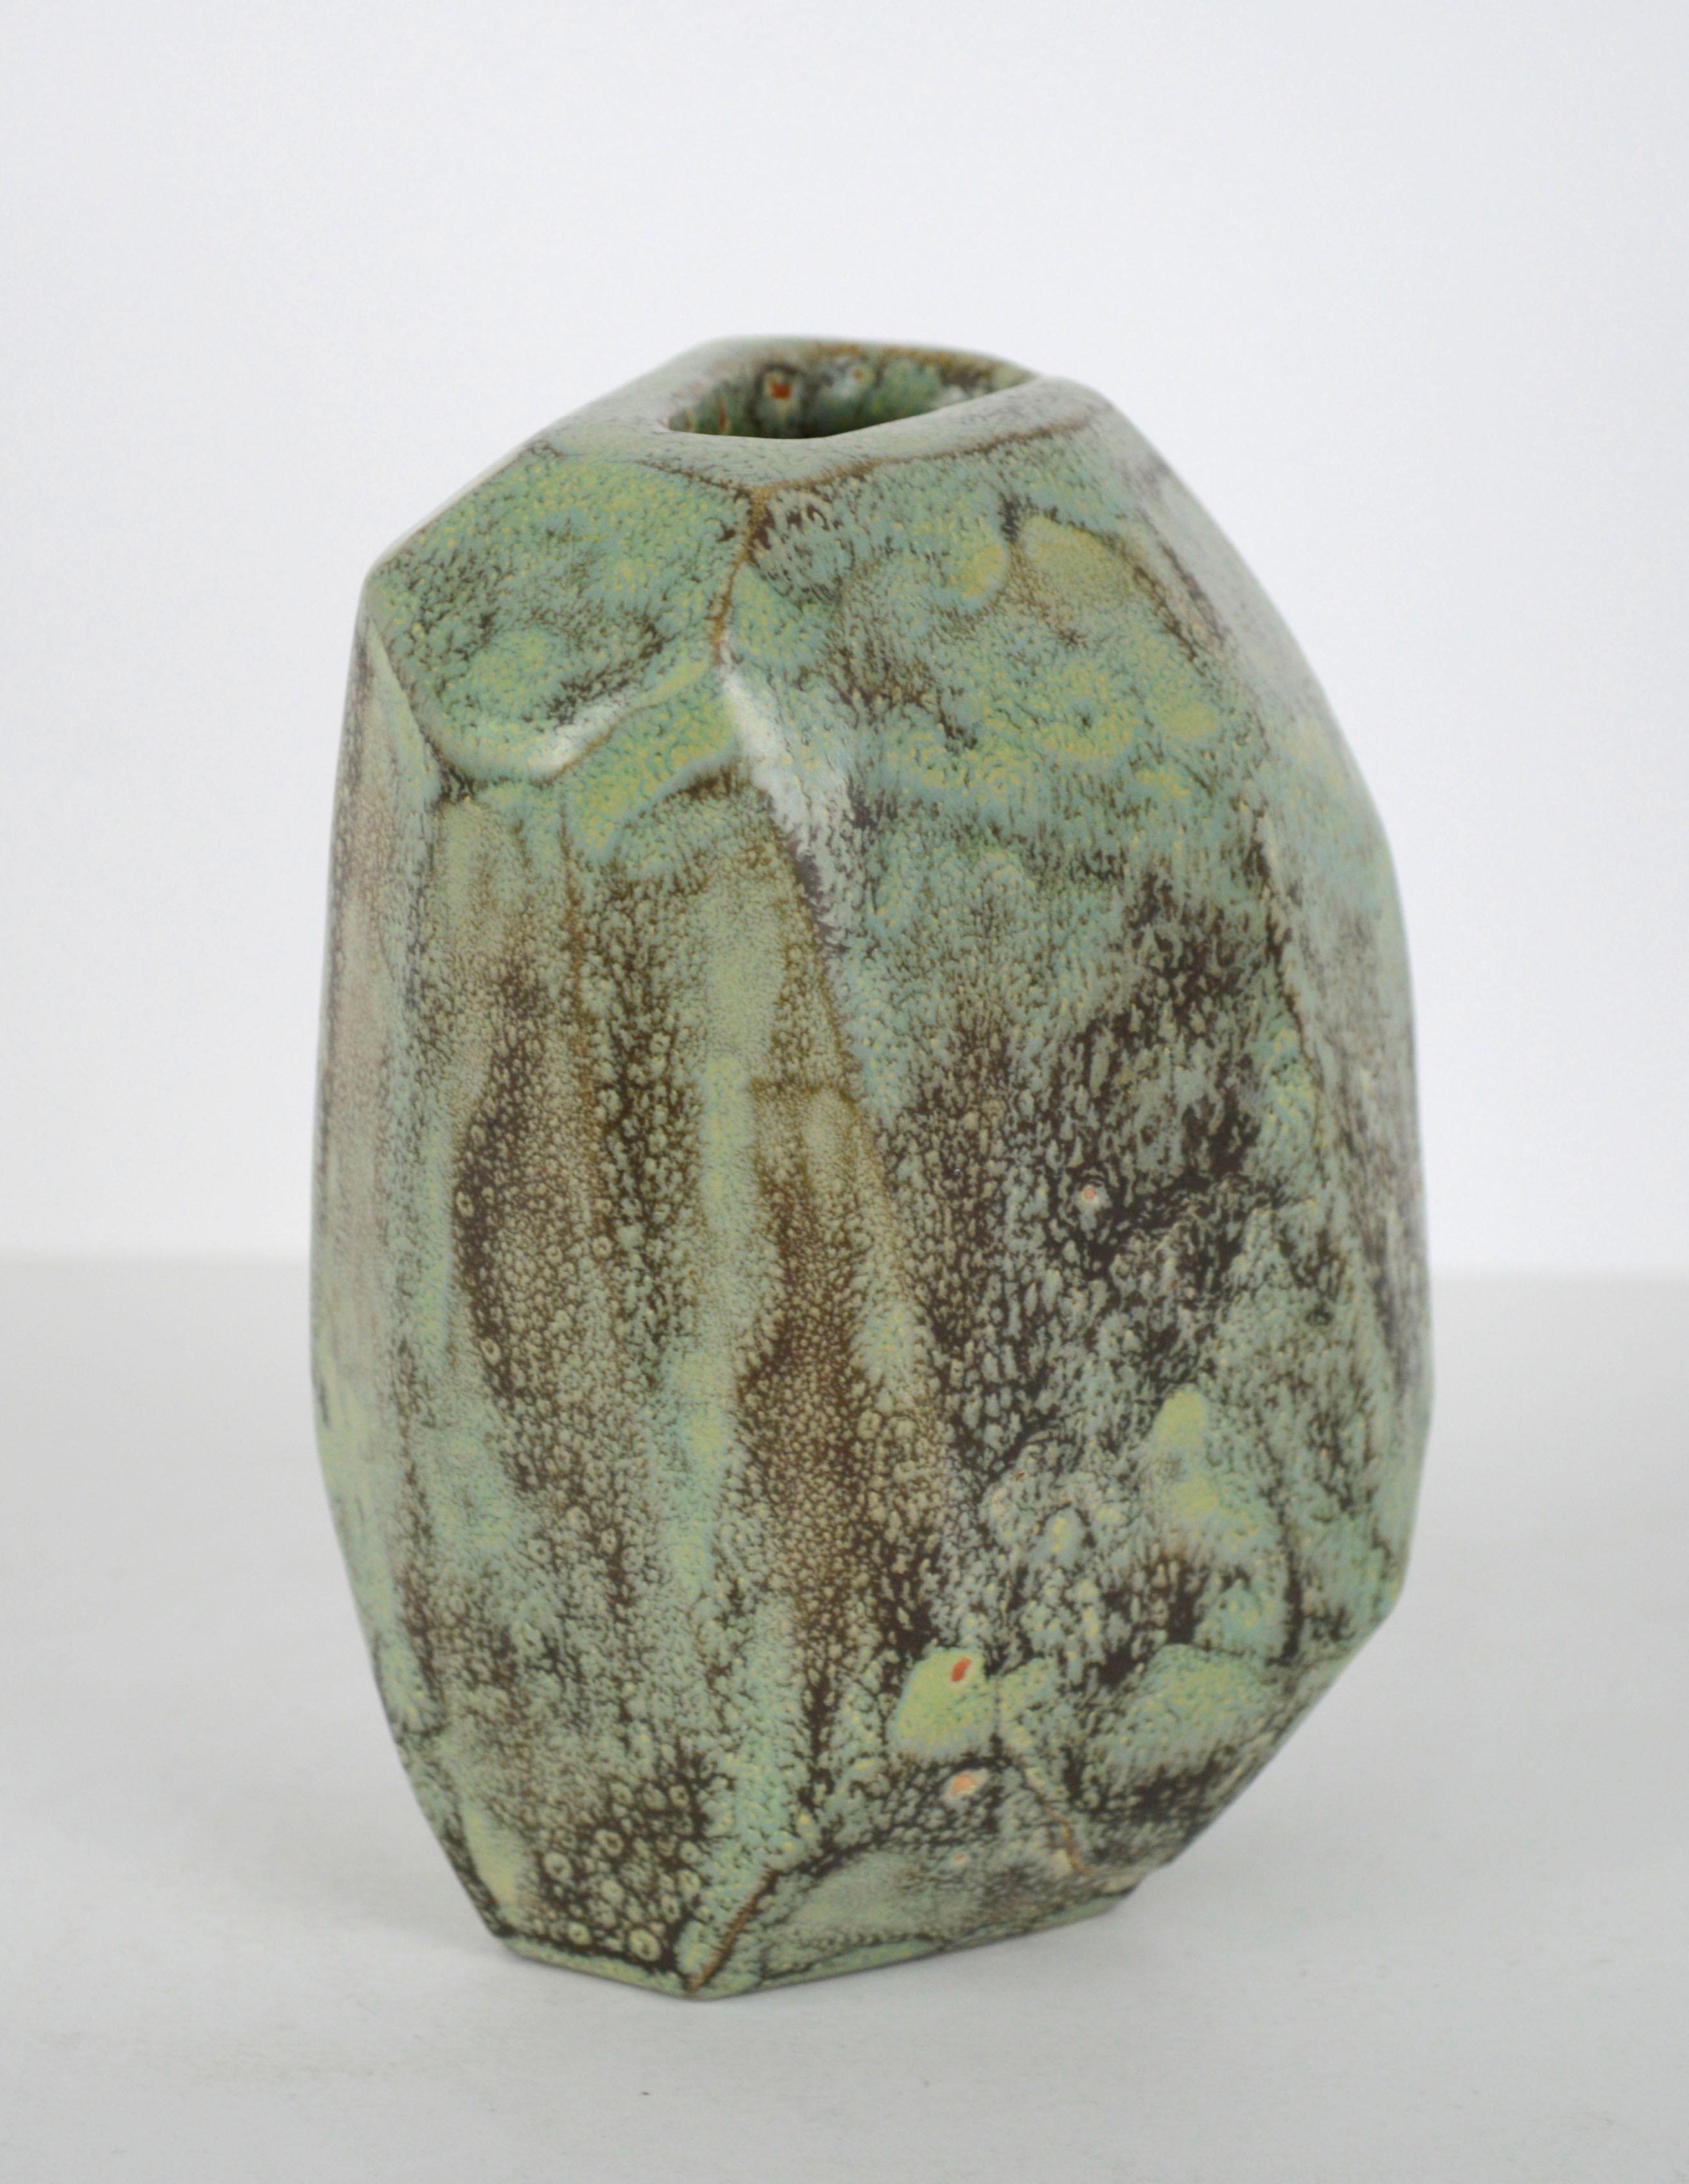 Gorgeous abstract ceramic sculptural vase shaped into a unique organic yet modern form, with turquoise and earth-toned glazes that naturally blend together an catch the light at different angles of the vase's geometric planed surface, by